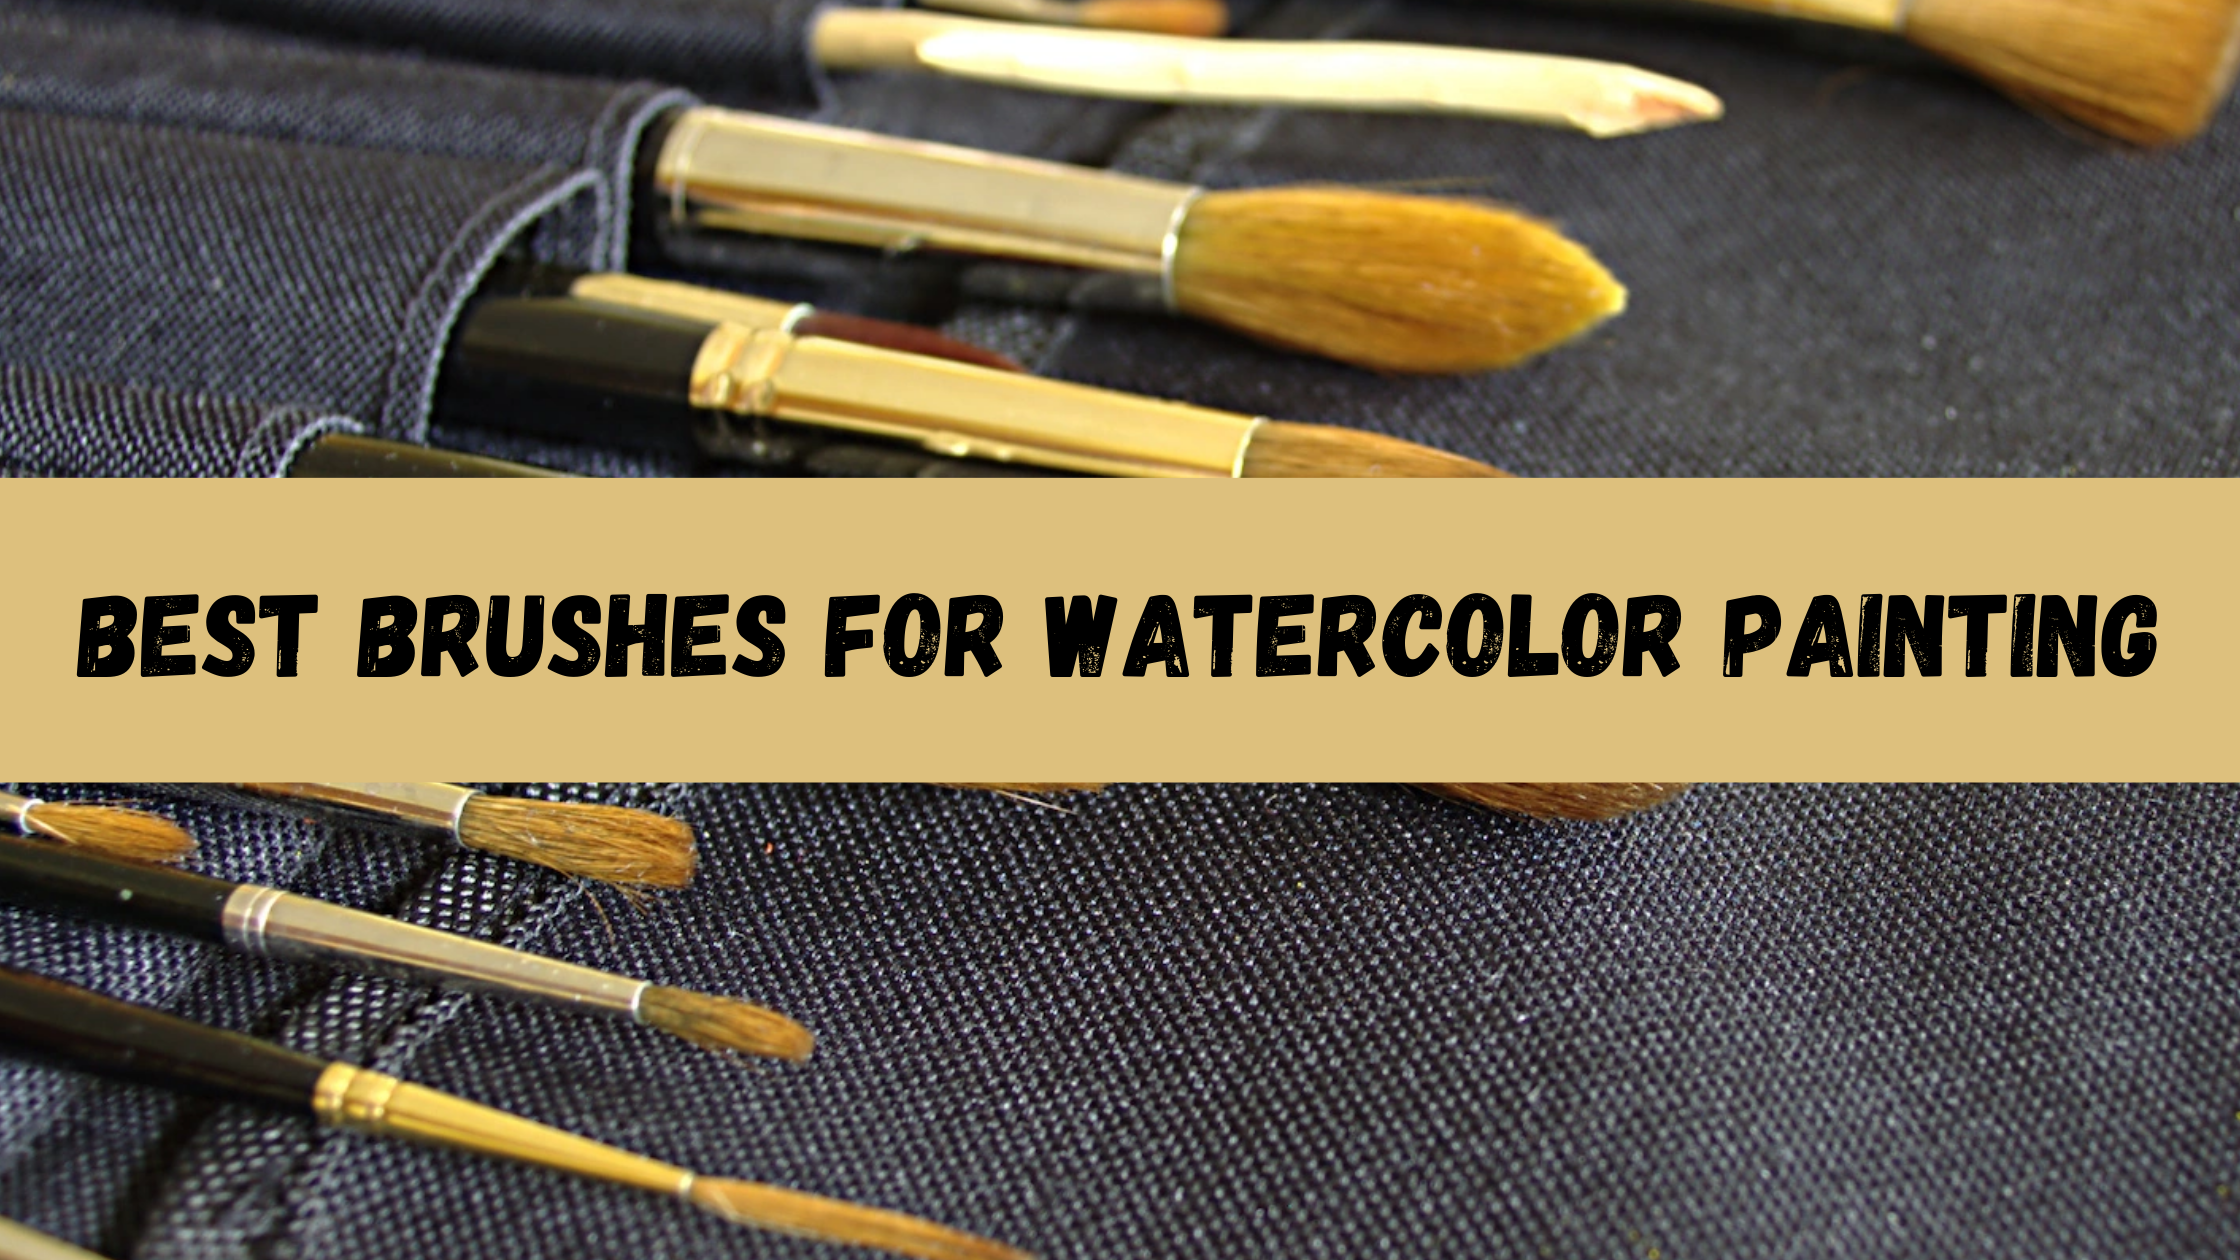 Best Brushes For Watercolor Painting